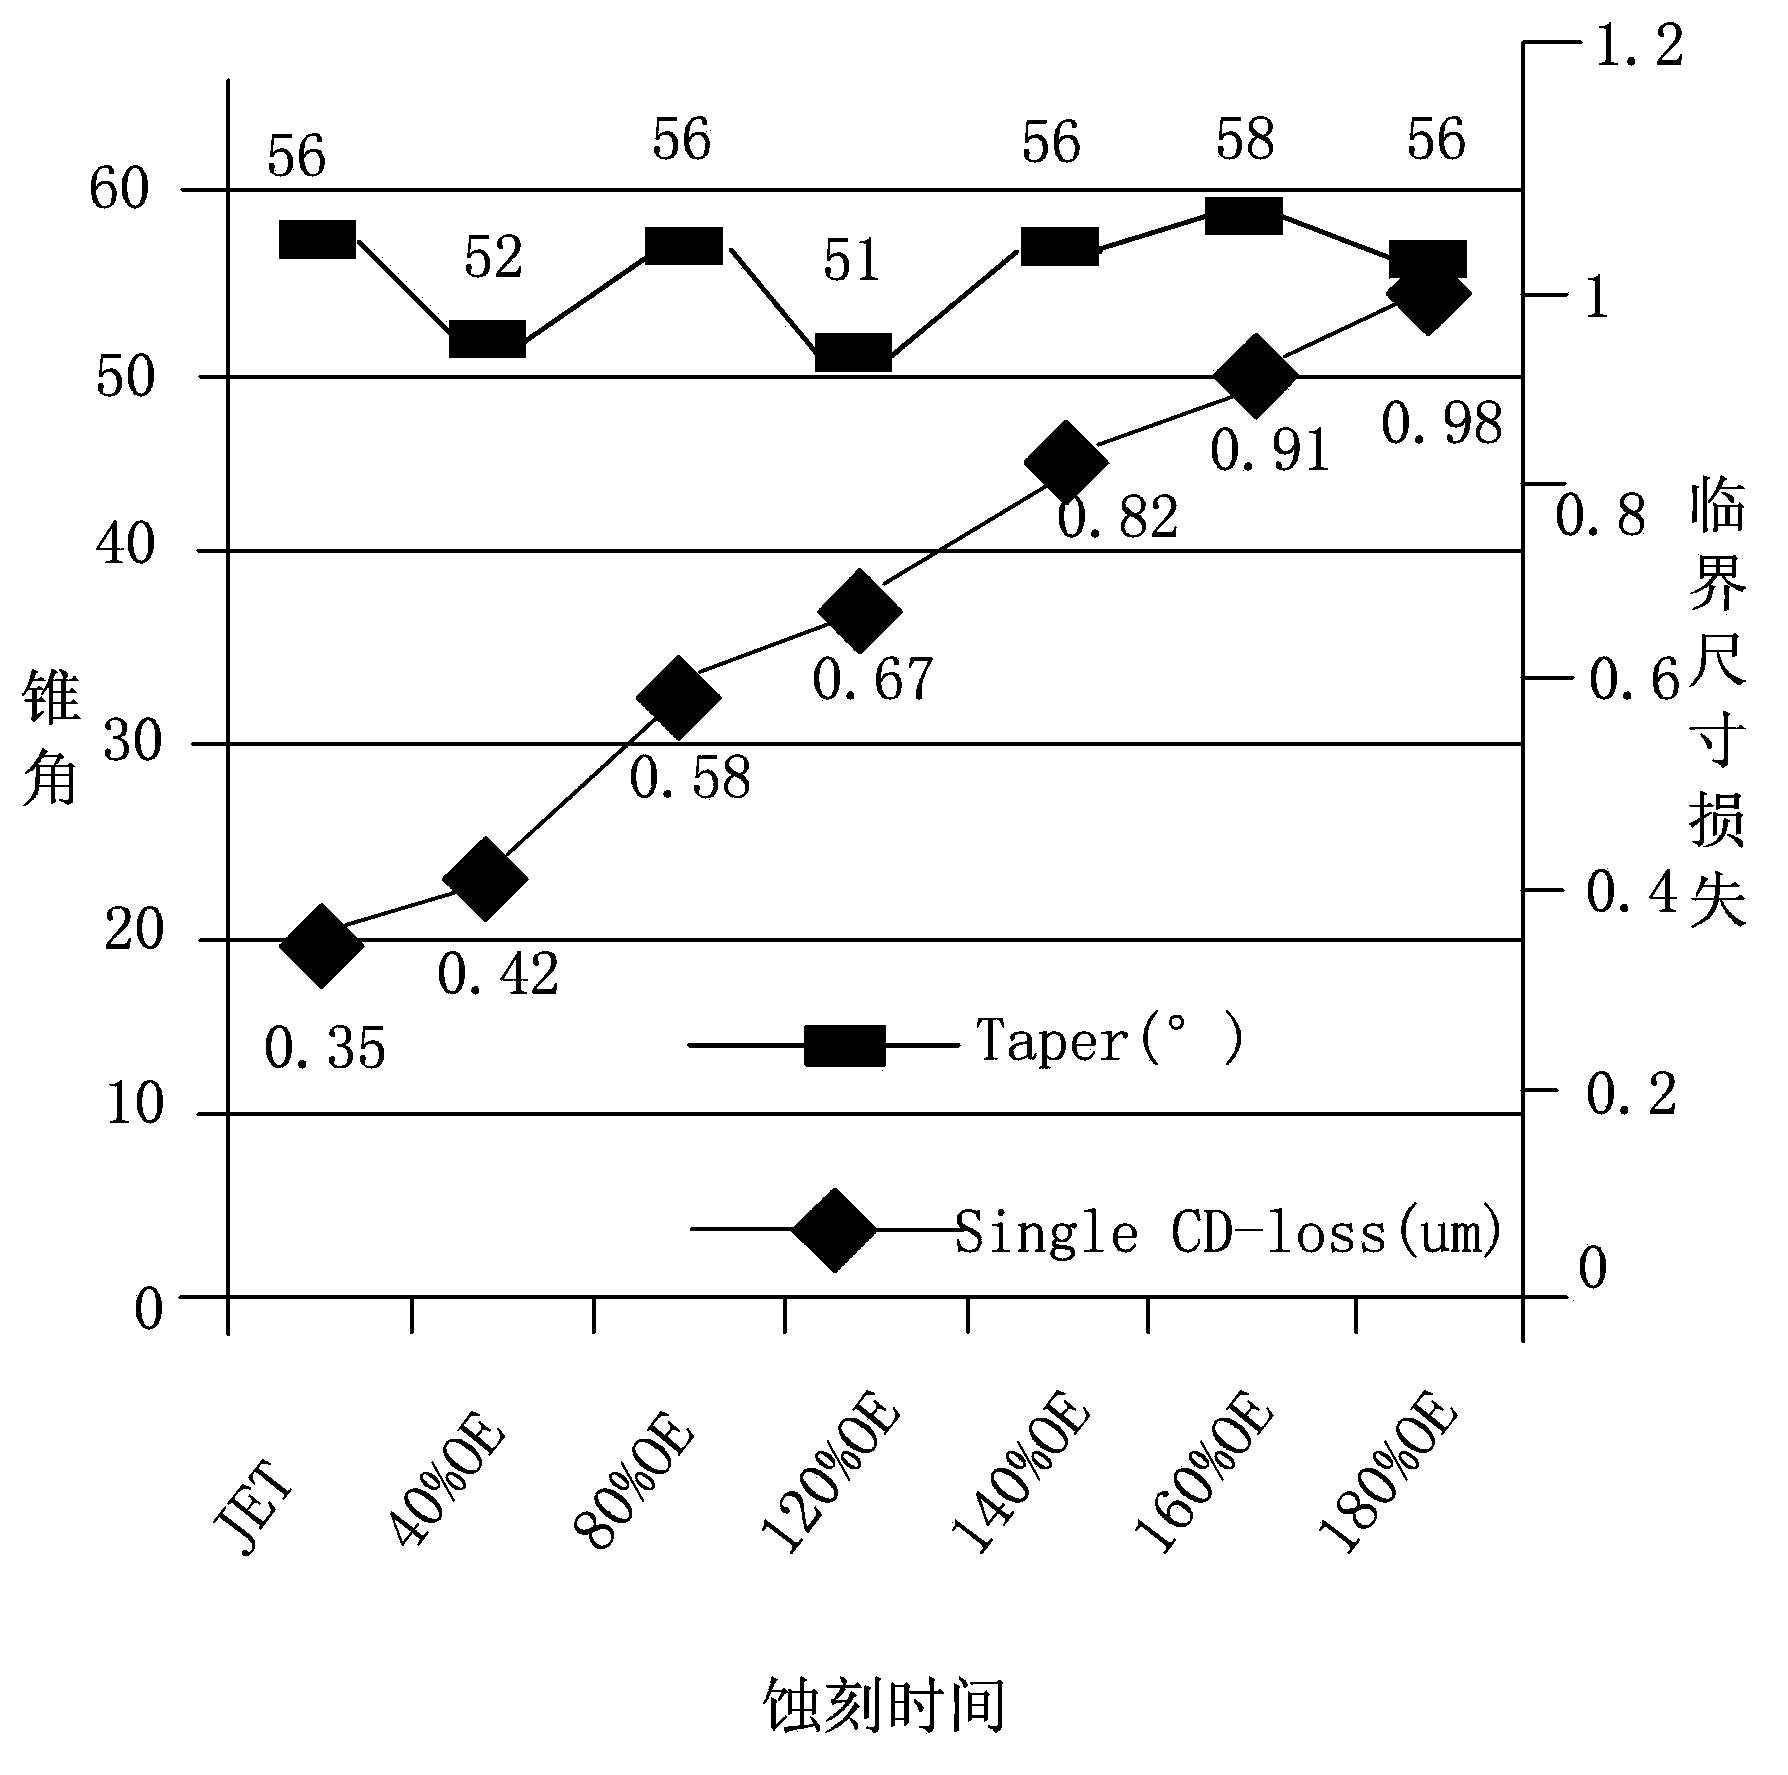 Etching liquid for TFT (thin film transistor)array substrate copper conductor